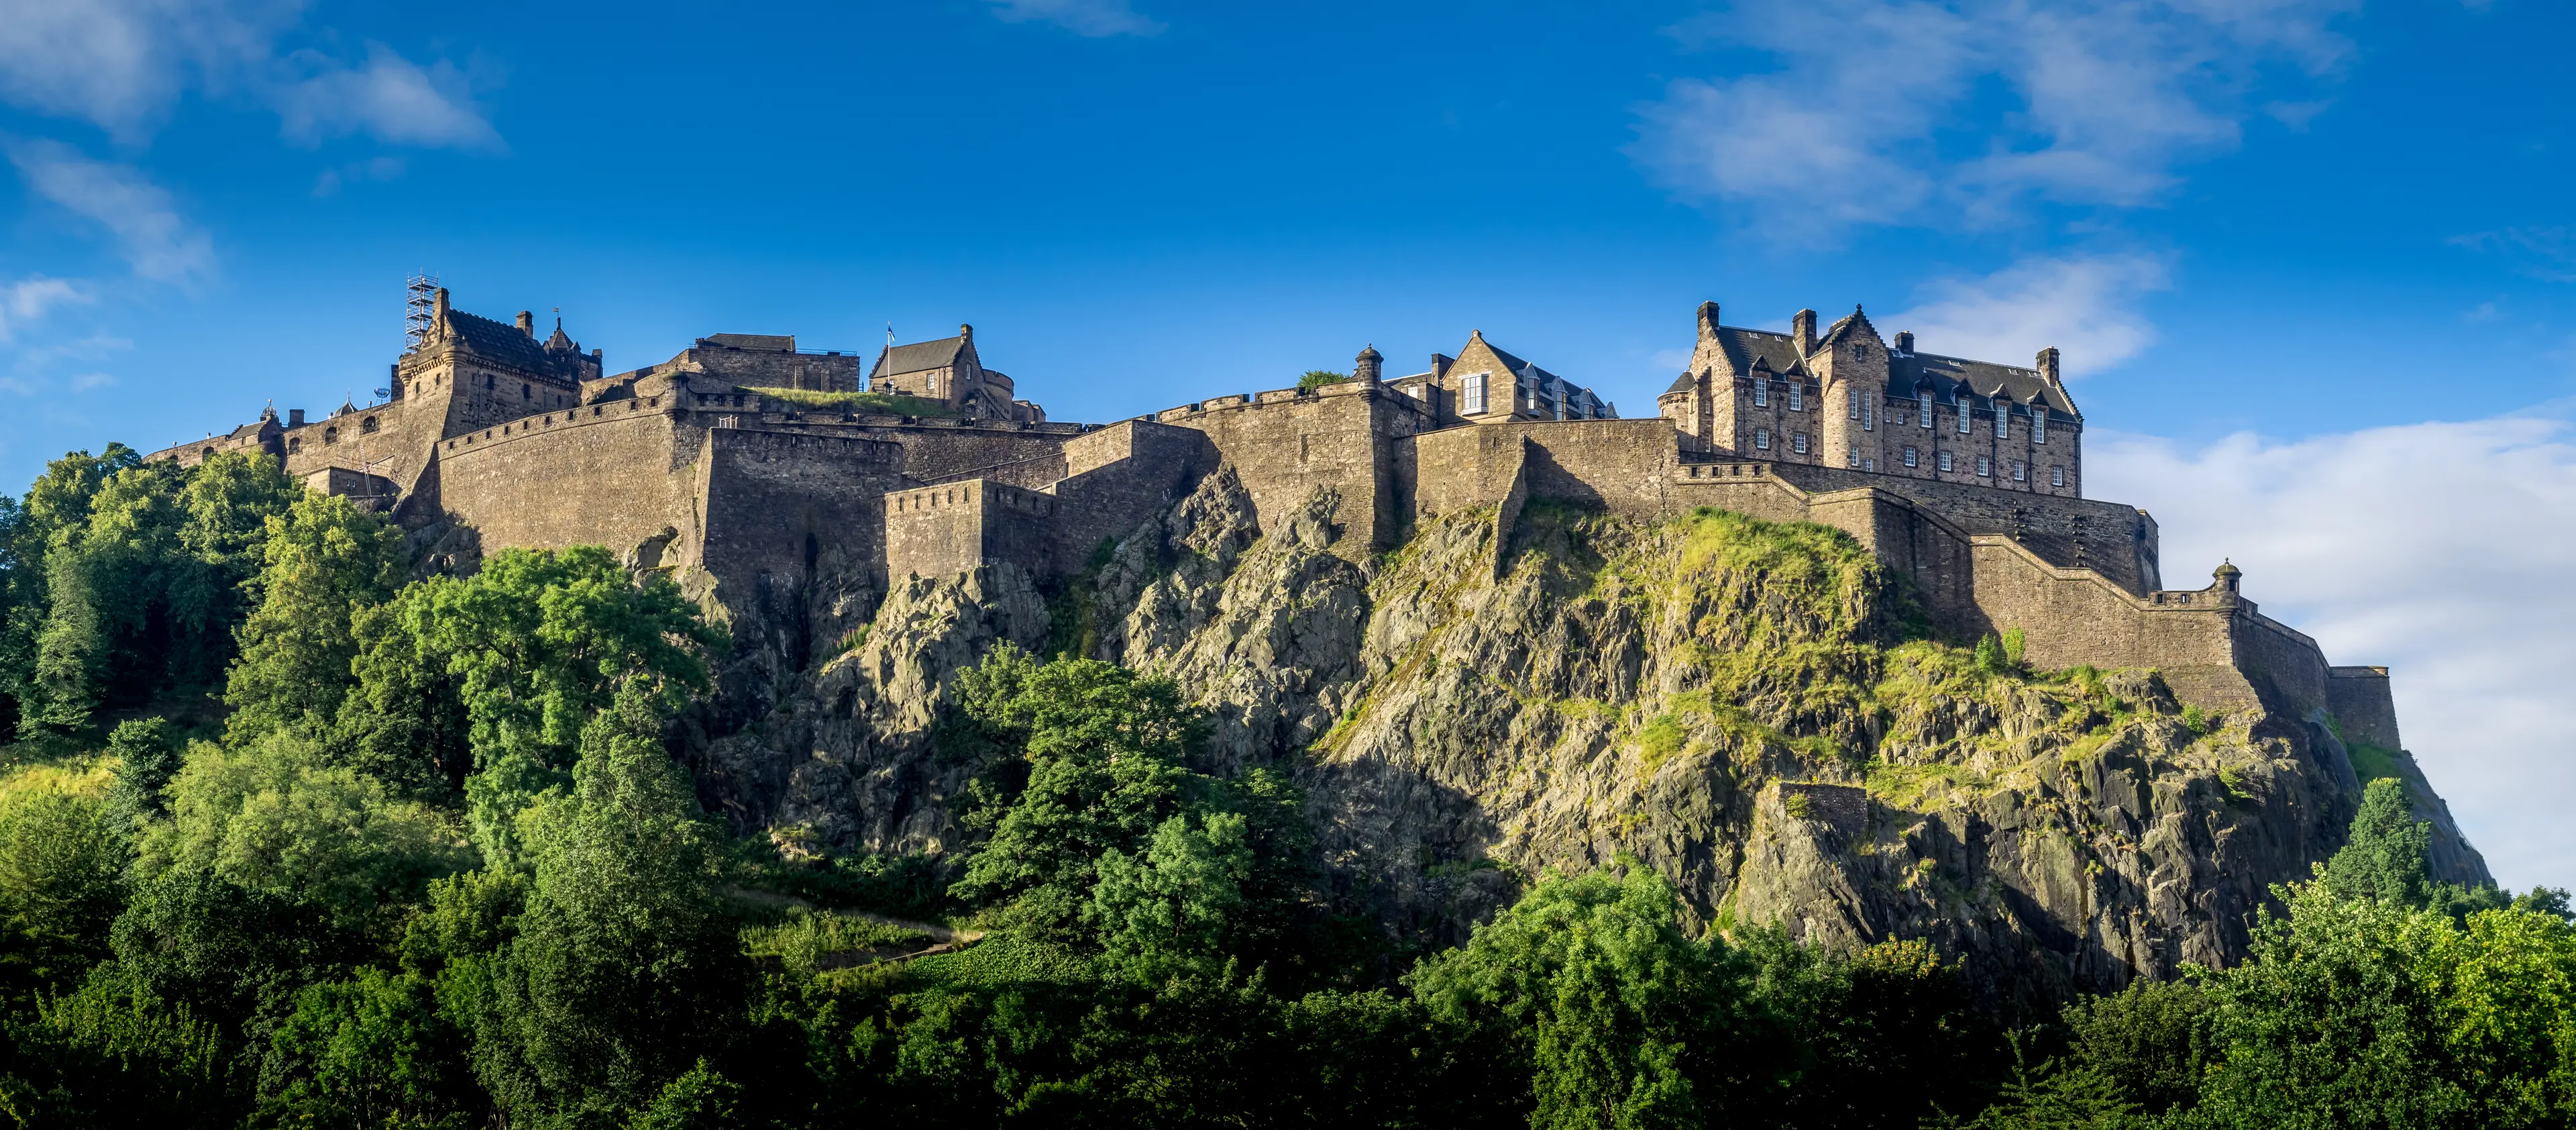 3-Day Family Sightseeing and Shopping Adventure in Edinburgh